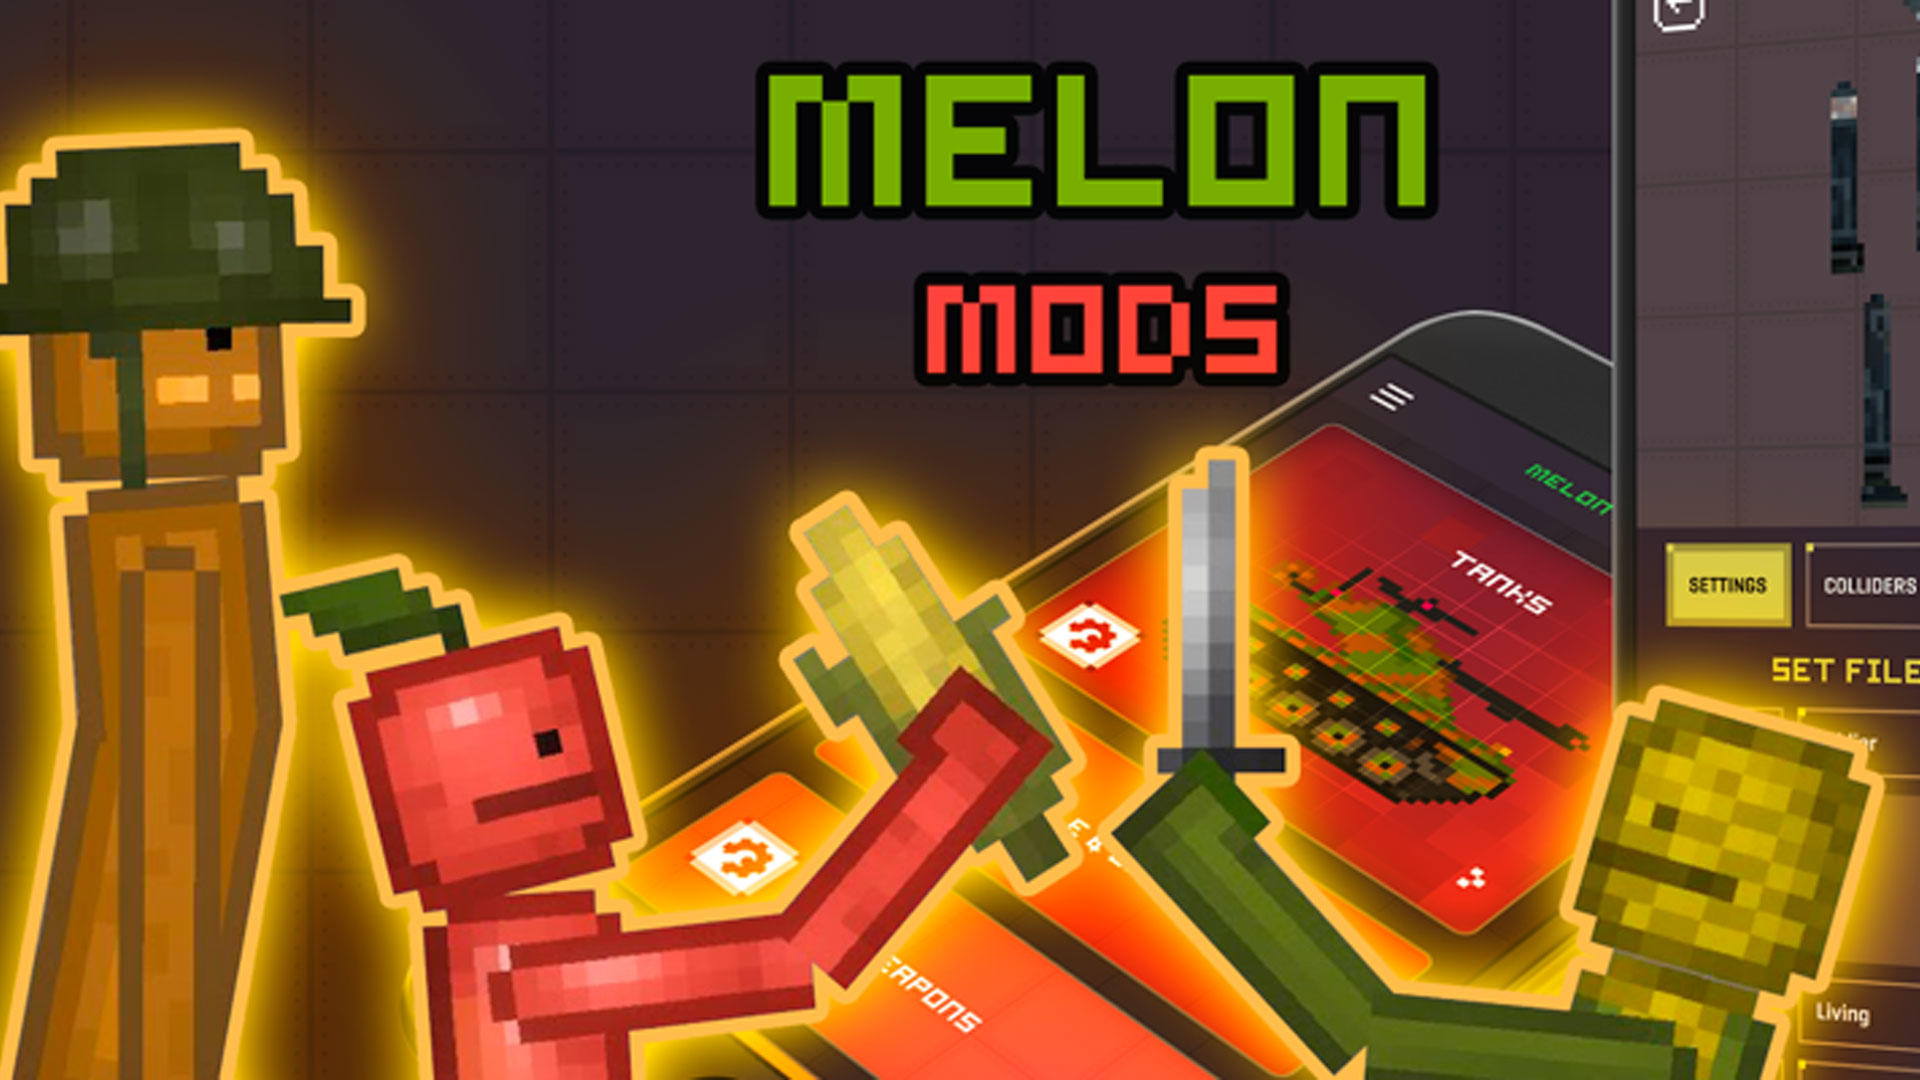 Mod Skins Melon Playground for Android - Free App Download